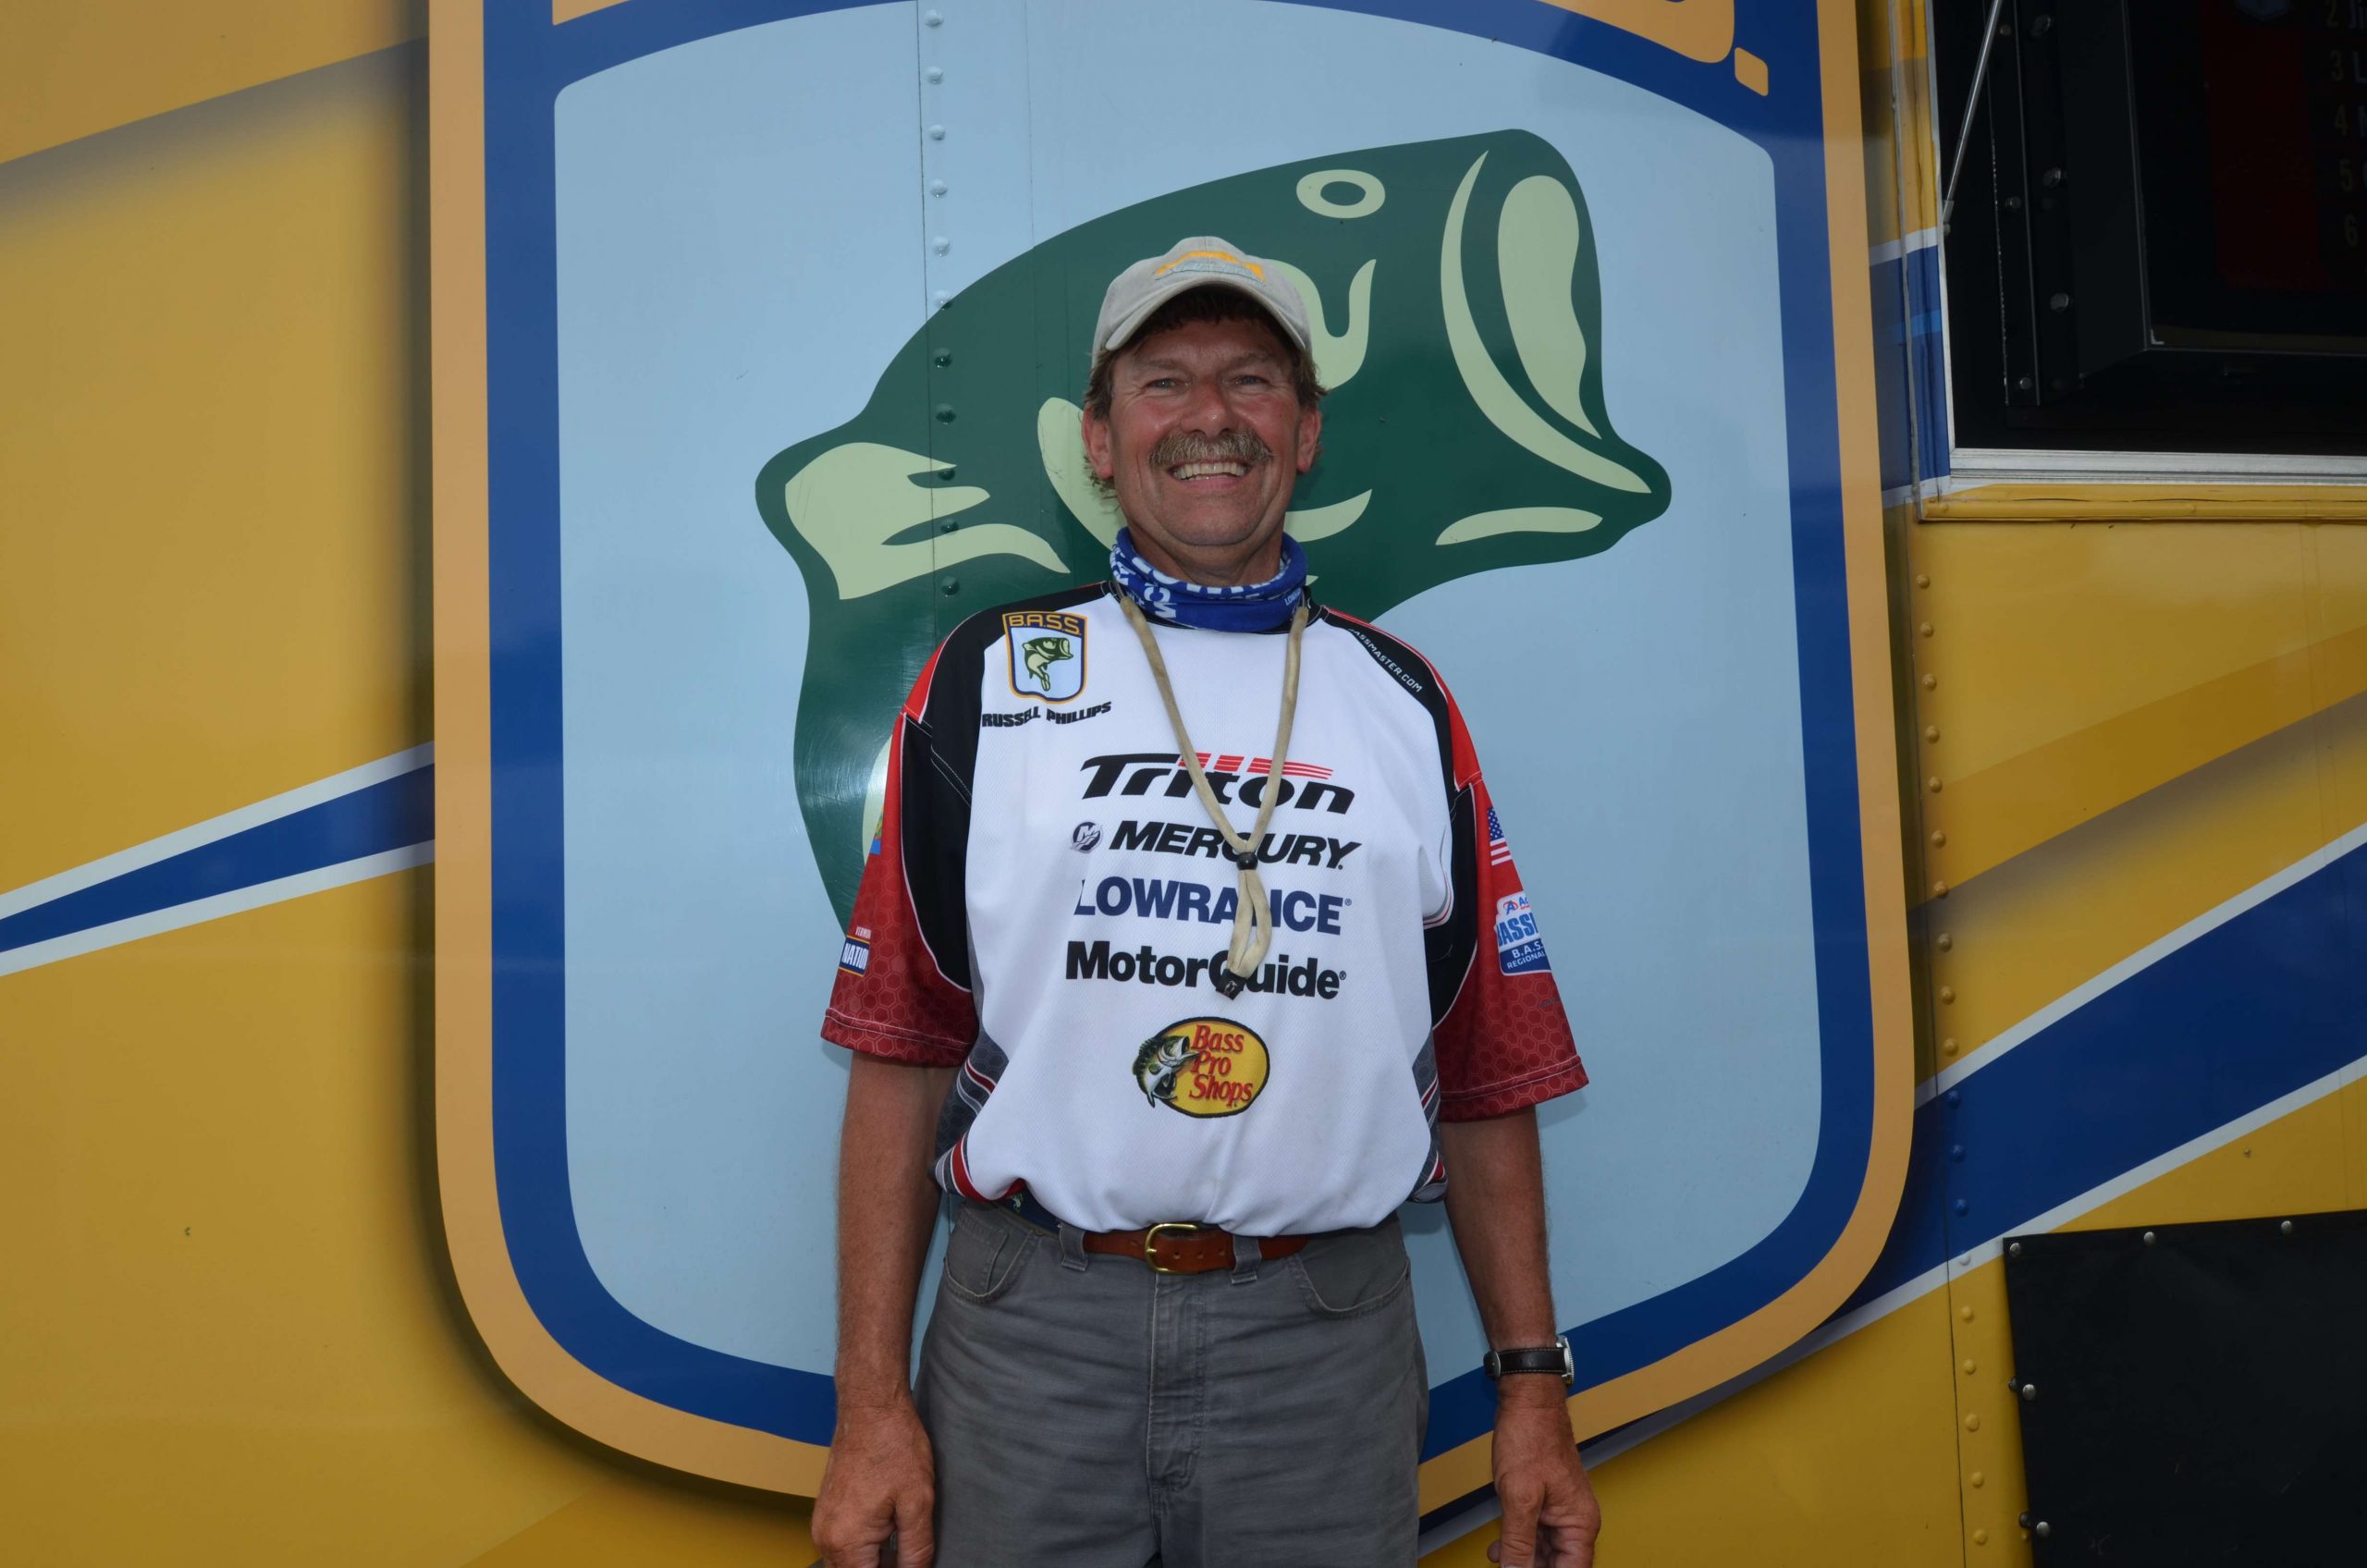 <h4>
Russell Phillips</h4>
Vermont Boater<br>
B.A.S.S. Nation Club: Addison Bass Club <BR>
Occupation:  Automotive restoration technician<BR>
Hobbies: Family, grandkids<BR>
Sponsors: VRC Rods, Vermont B.A.S.S. Nation, Krank5Baits, Lowrance, MotorGuide

